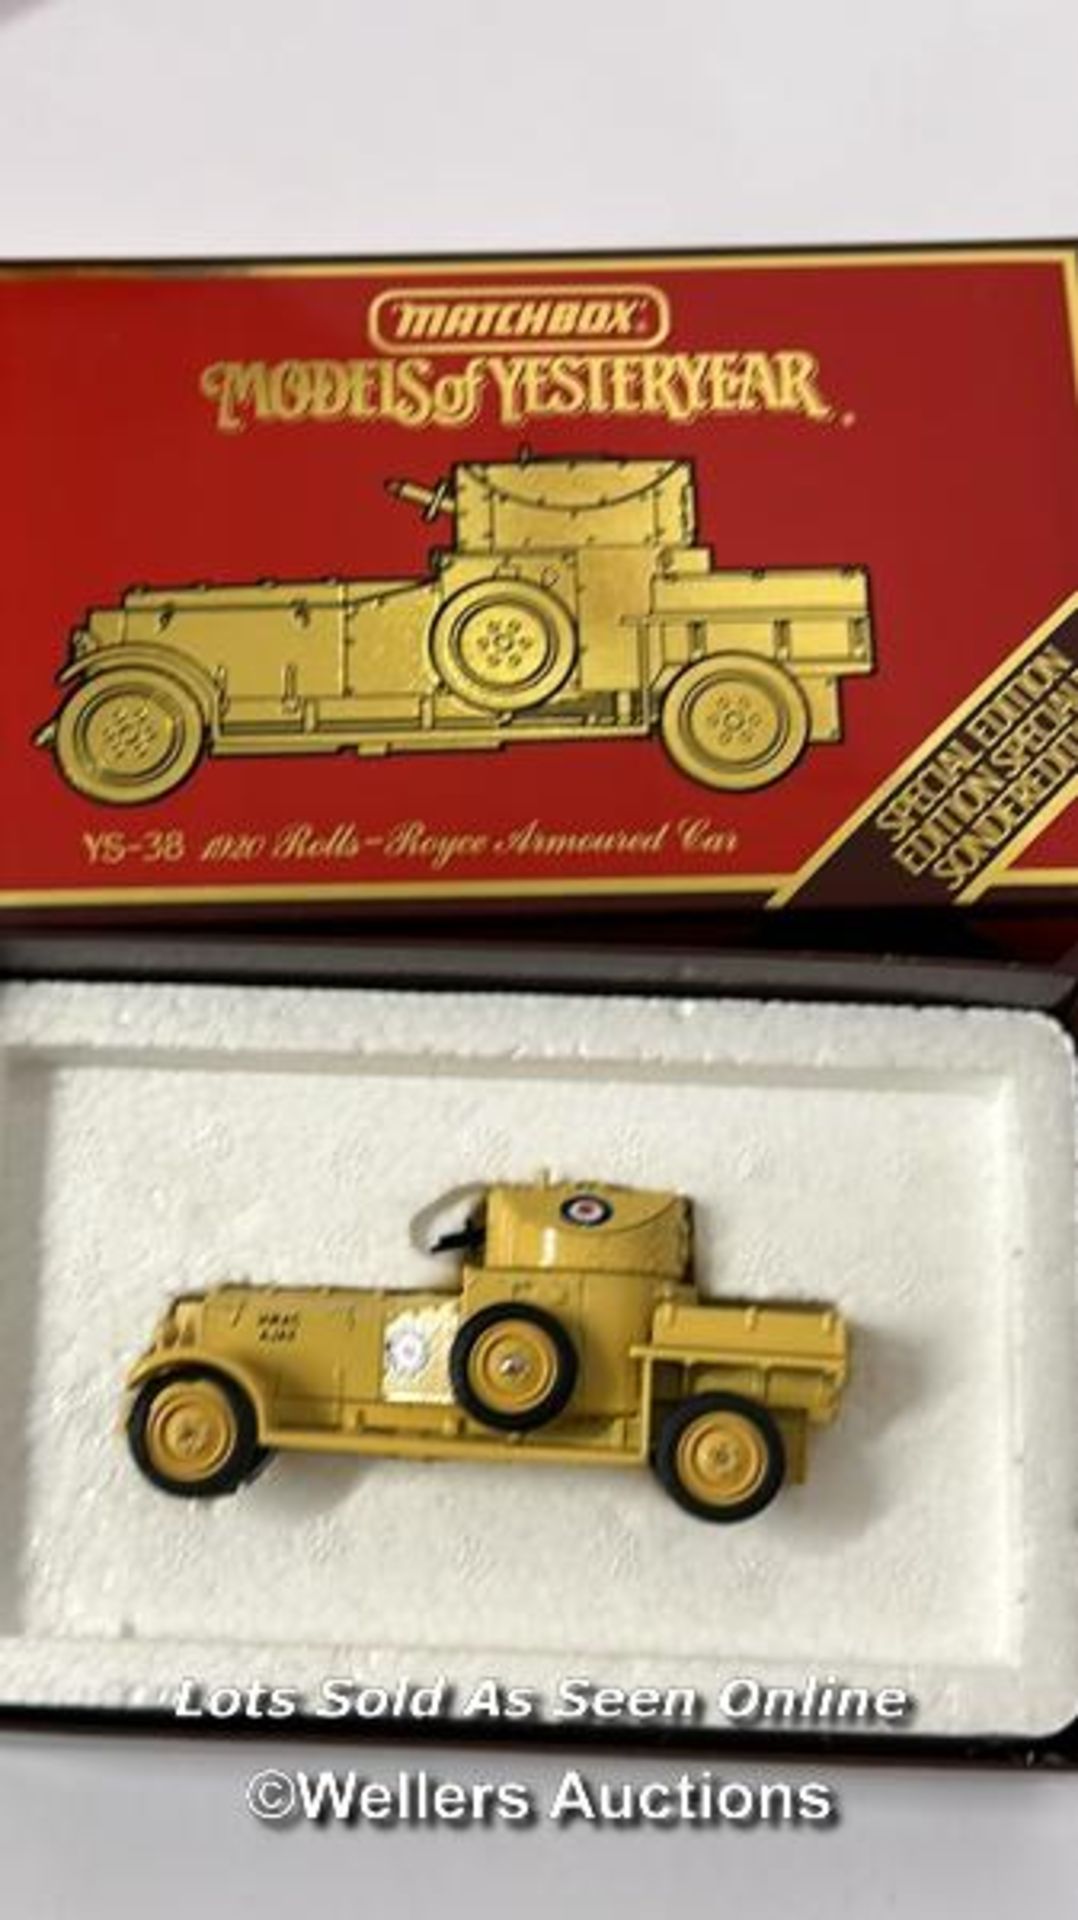 Matchbox Models of Yesteryear 1920 Rolls-Royce Armoured Car YS-38, Limited edition, boxed - Image 3 of 5